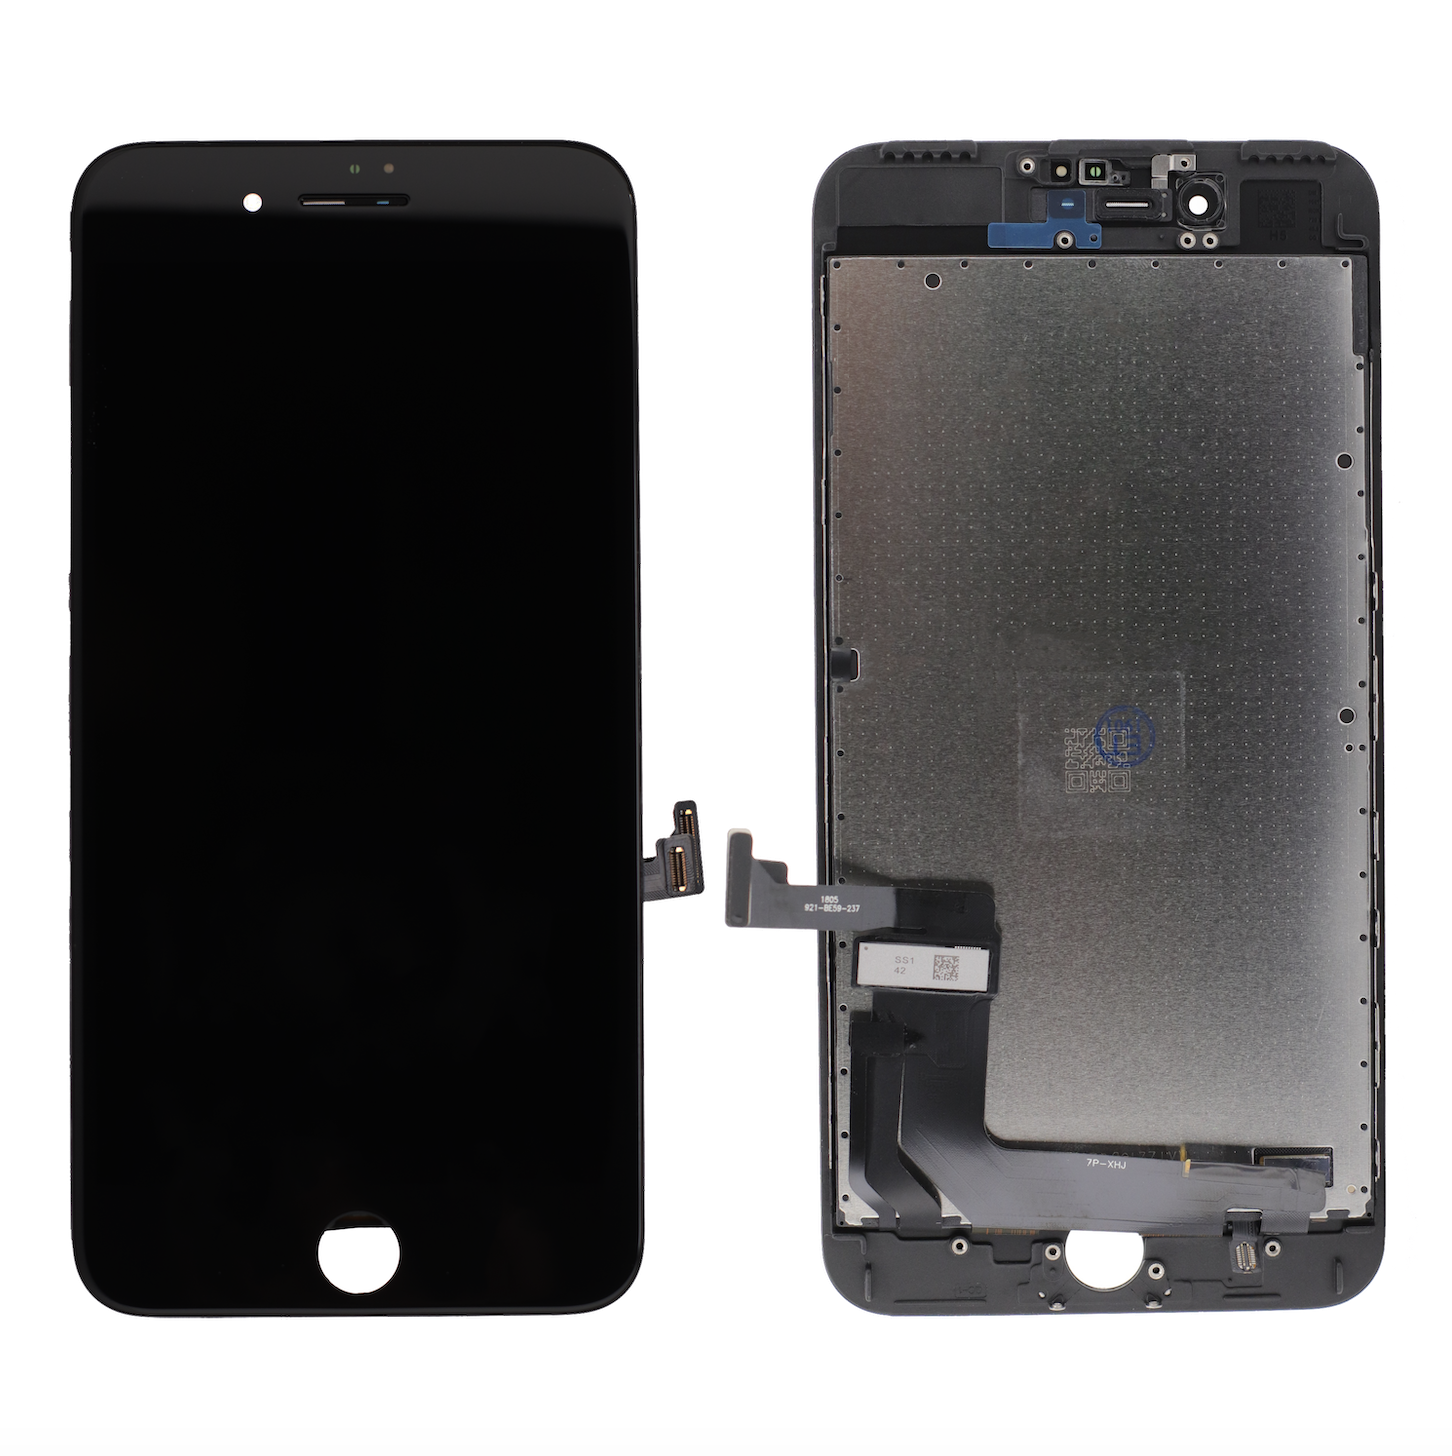 Premium LCD Assembly for use with iPhone 7 Plus (Black)